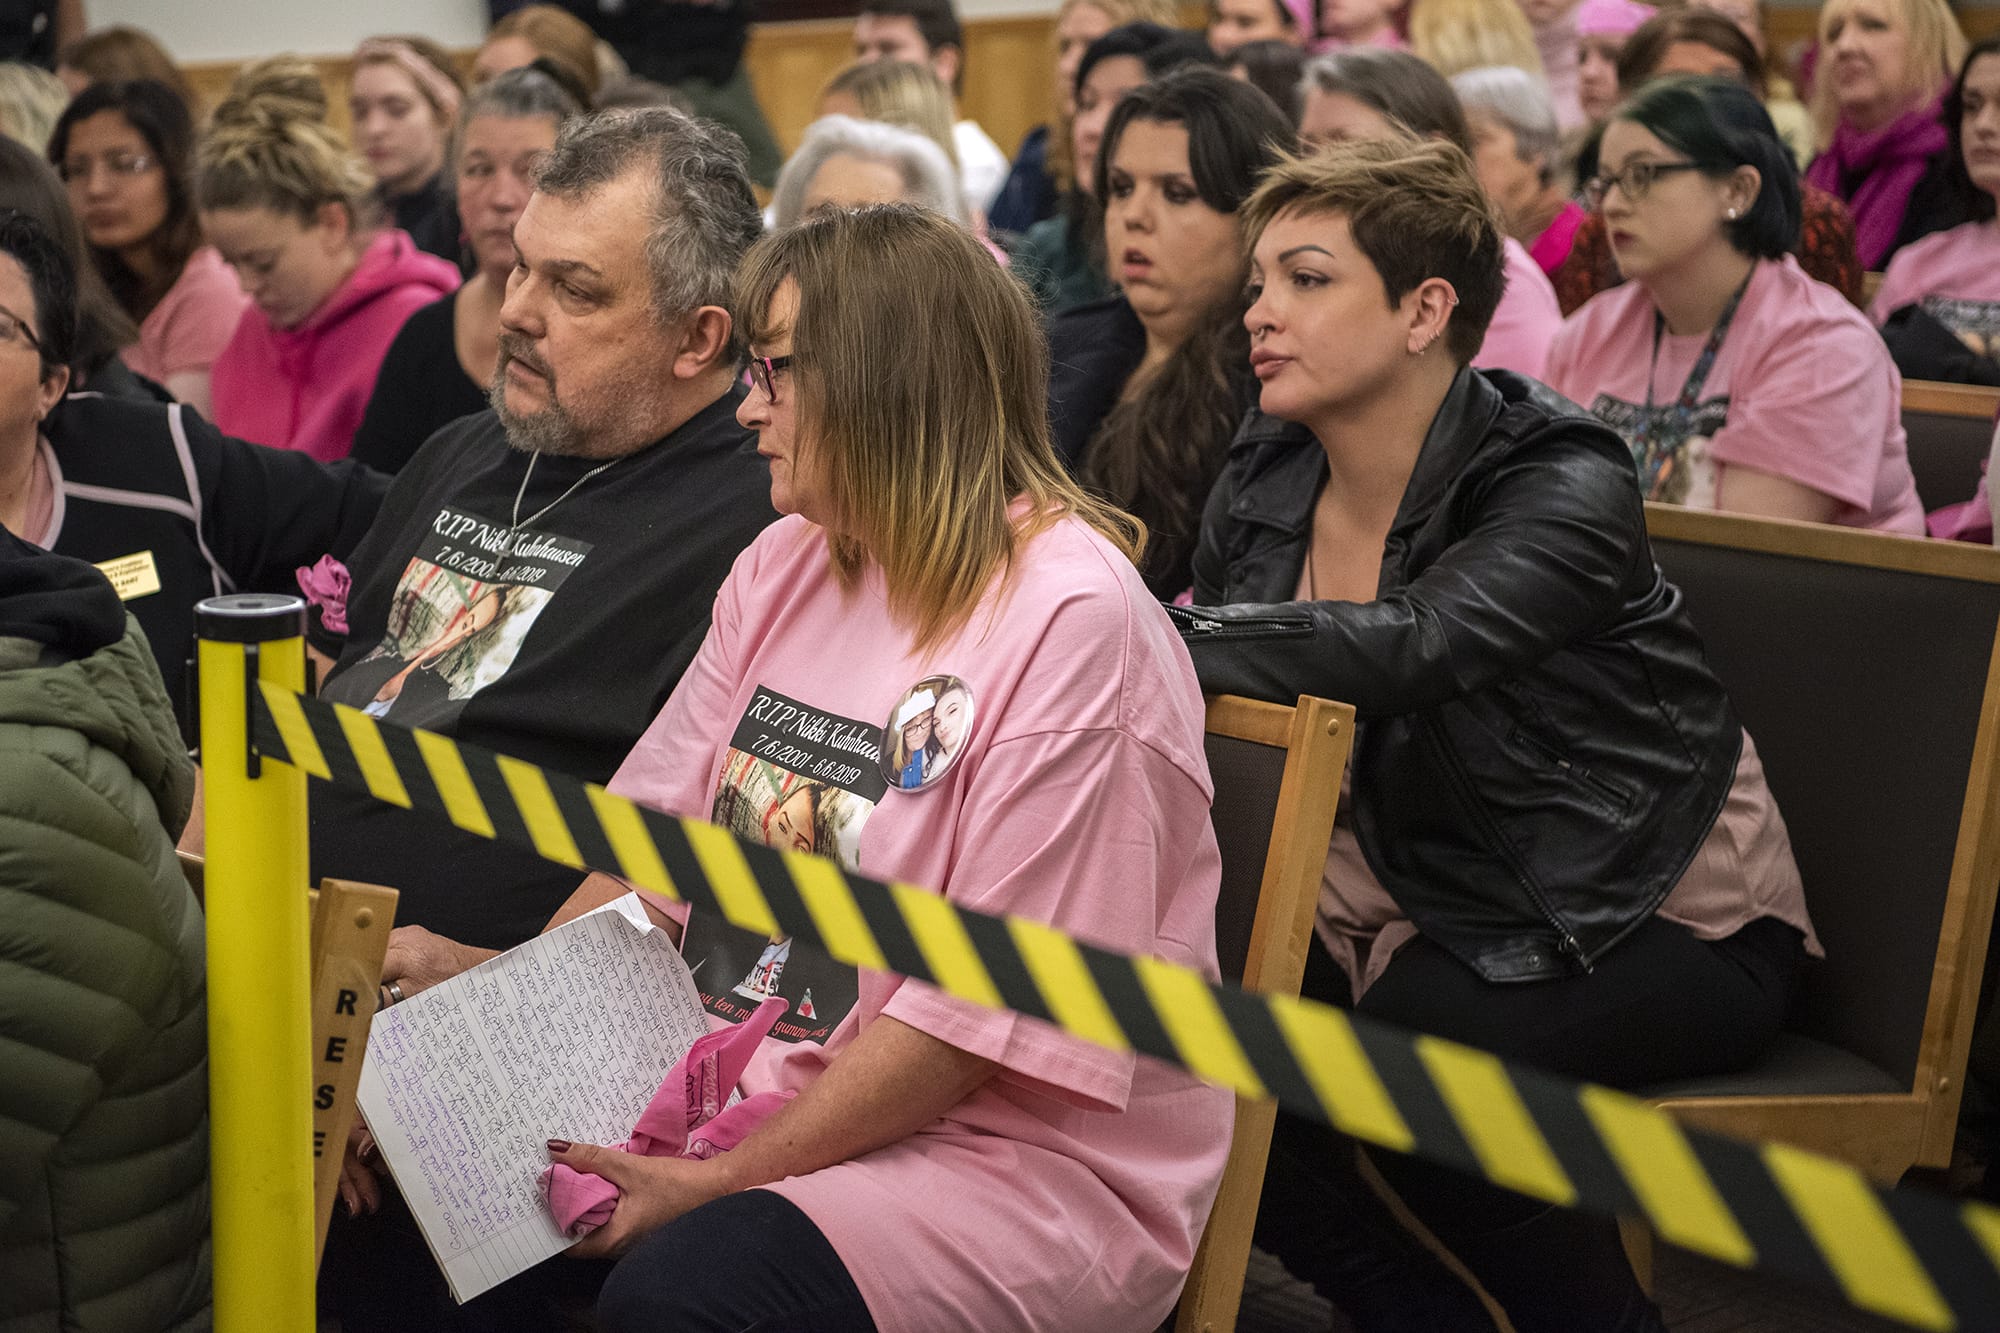 Nikki Kuhnhausen's stepfather Vincent Woods, left, and mother Lisa Woods, right, listen to the judge during the bail review hearing for David Y. Bogdanov at Clark County Superior Court on Thursday morning, Jan. 2, 2020. Judge David Gregerson set $750,000 bail Thursday for Bogdanov, the suspect in the slaying of a transgender Vancouver teen Nikki Kuhnhausen. Transgender activist and advocate Devon Rose Davis, right, comforts Lisa Woods.